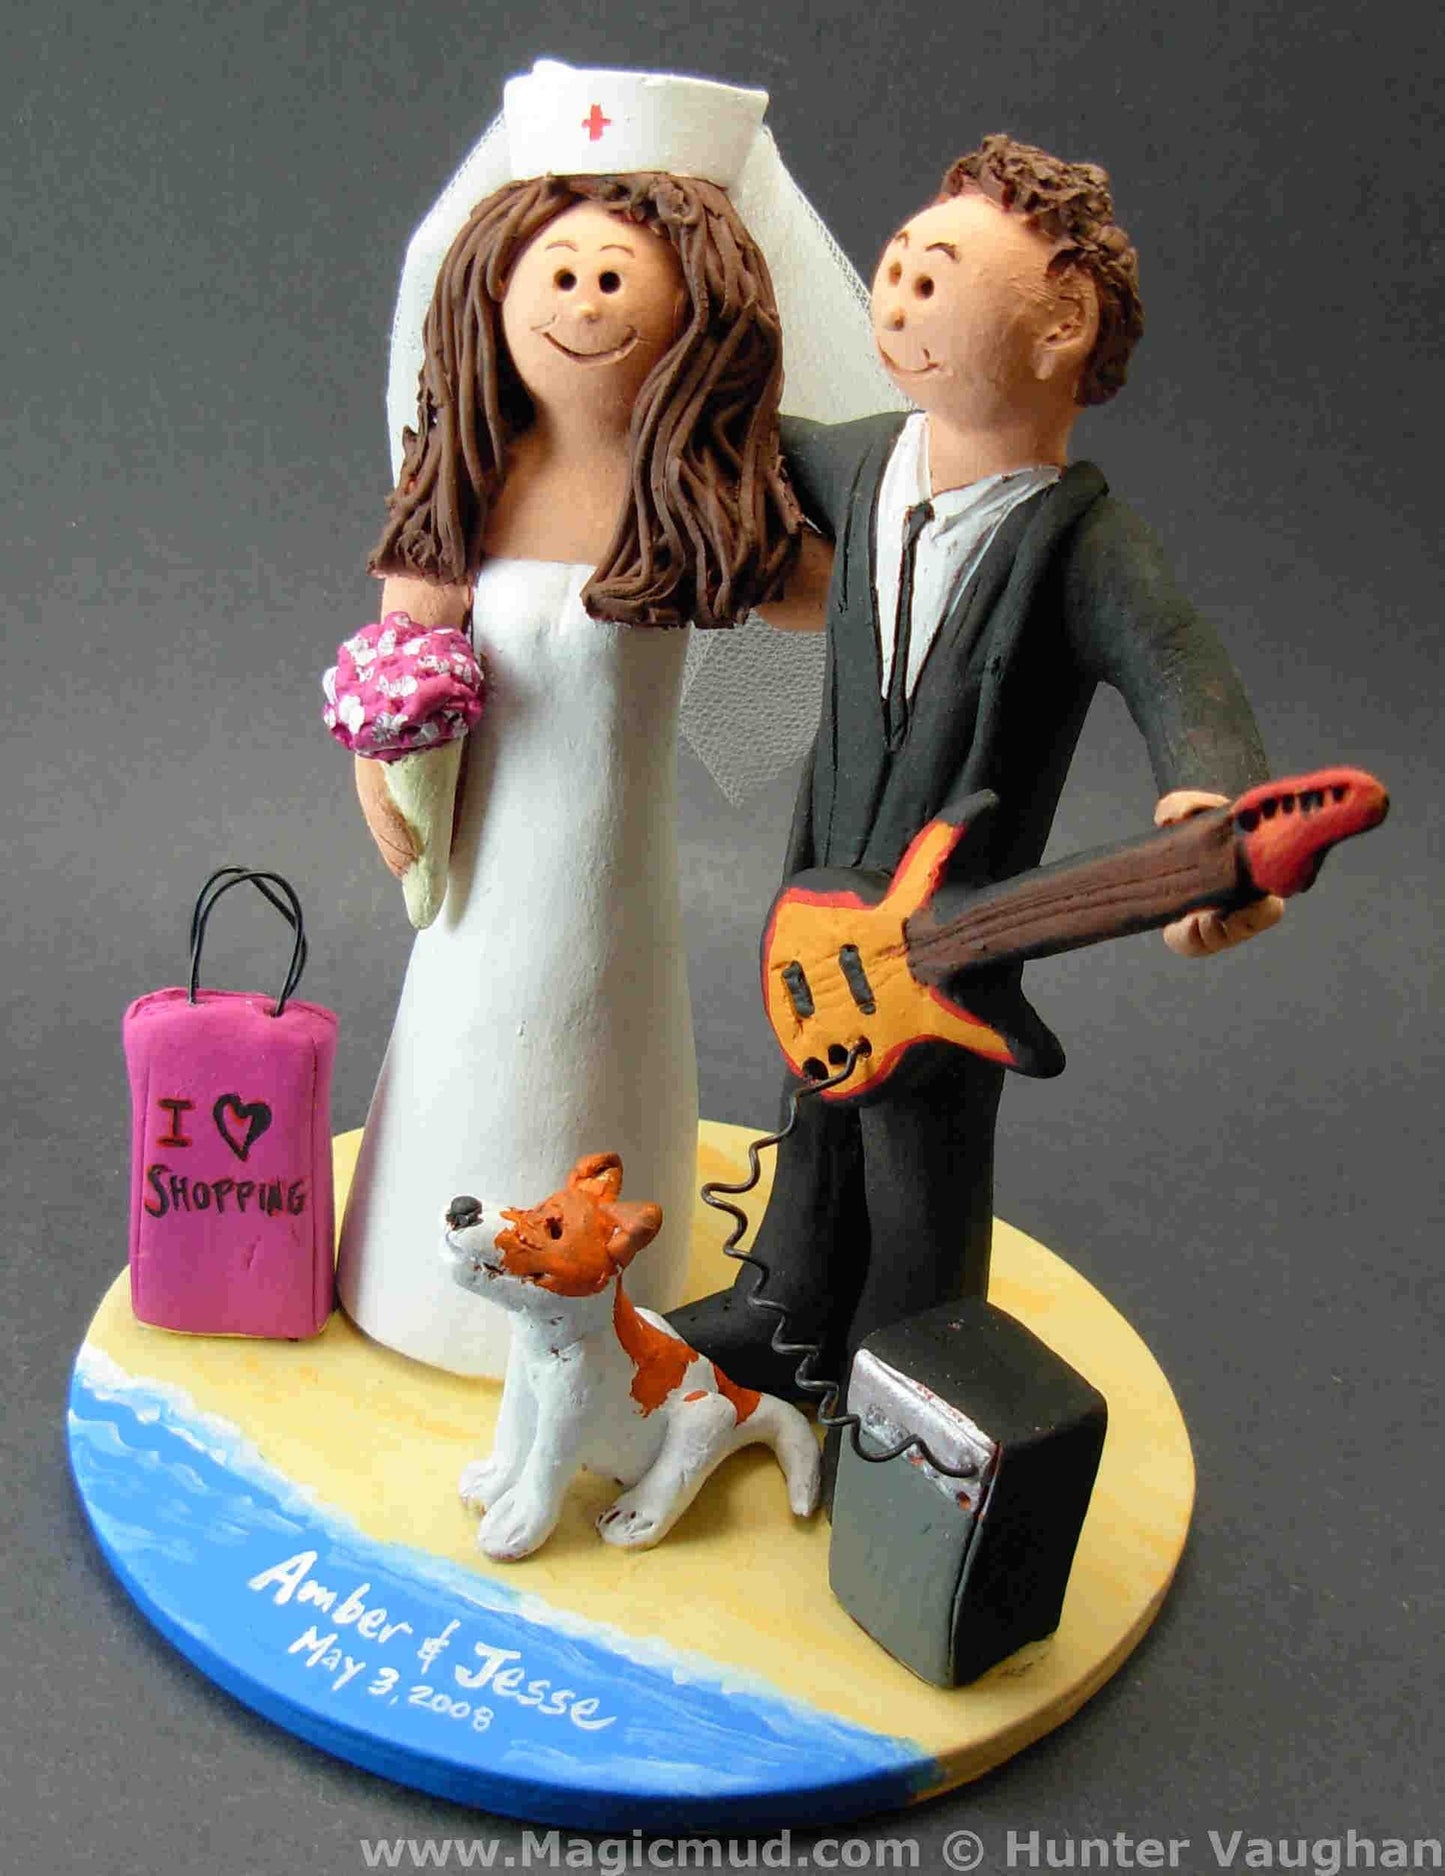 Rock n Roll Guitarist's Wedding Cake Toppers, Custom Made Rock Star Wedding Cake Topper - Guitar Wedding Cake Topper